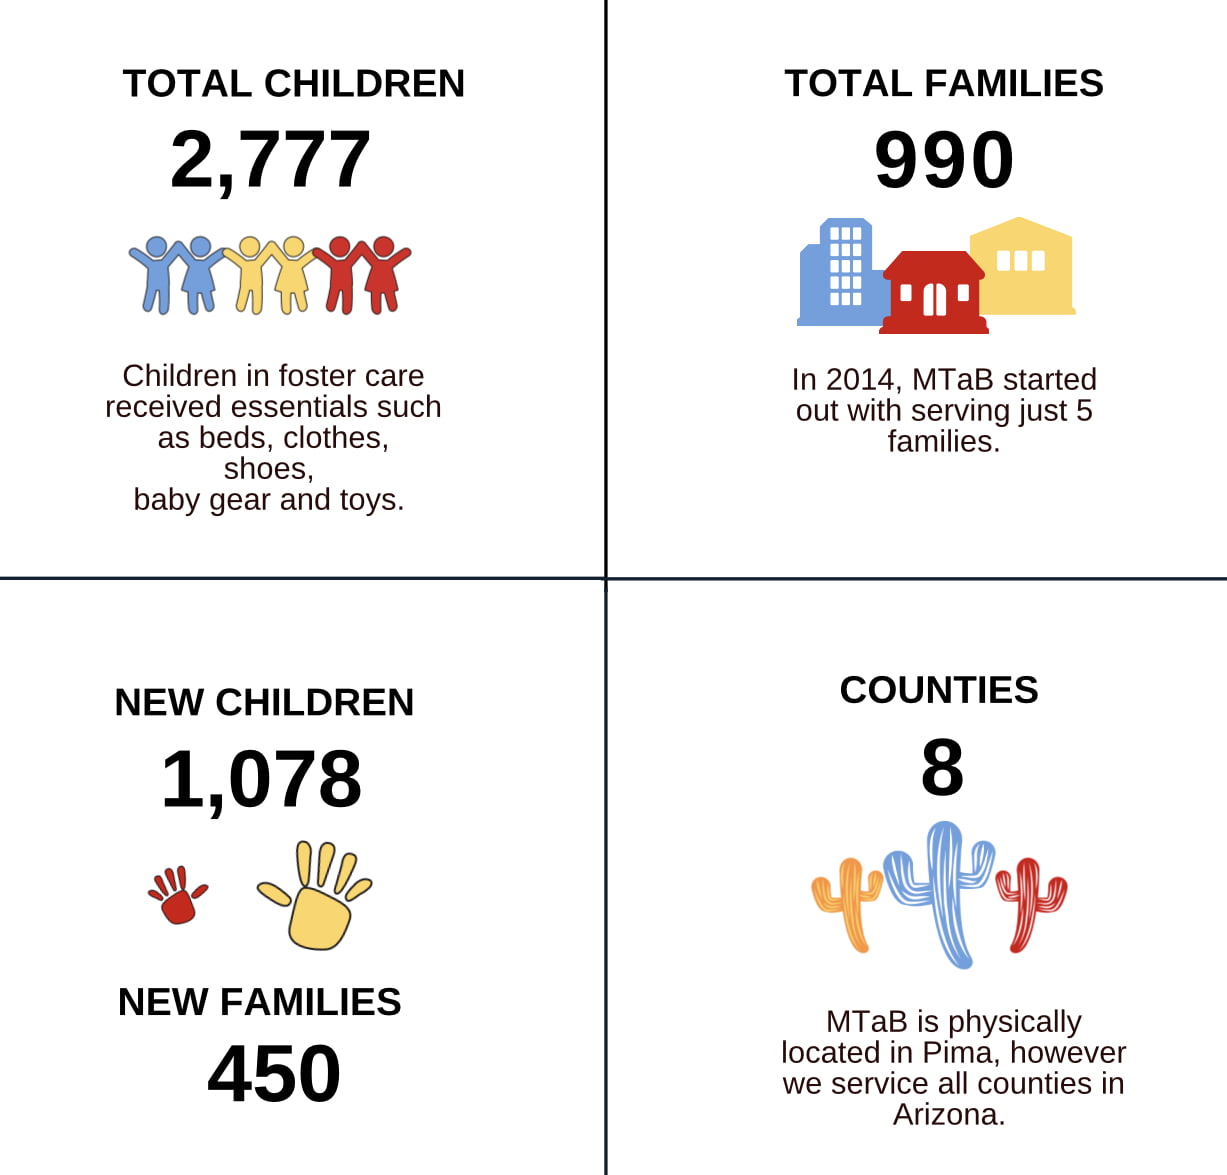 Infographic reads "Total children: 2,777 Children in foster care received essentials such as beds, clothes, shoes, baaby gear and toys. Total families: 990. In 2014, MTaB started out with serving just 5 families. New Children: 1,078. New families: 450. Counties: 8. MTaB is physically locateed in Pima; however, we service all counties in Arizona.